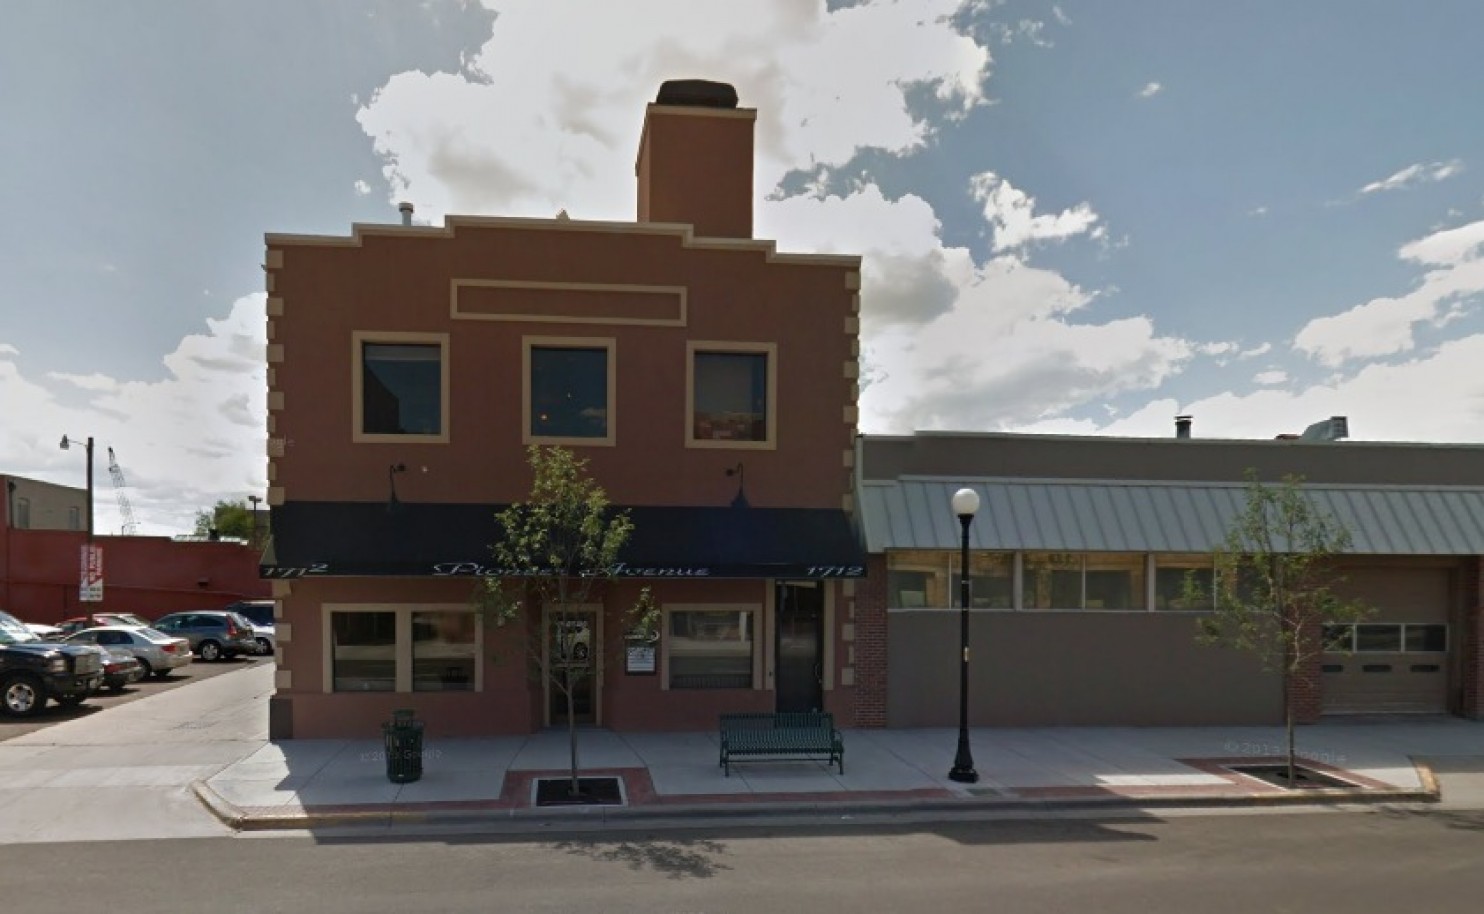 This building in Wyoming was the source of the relocation of the internet (washington post)